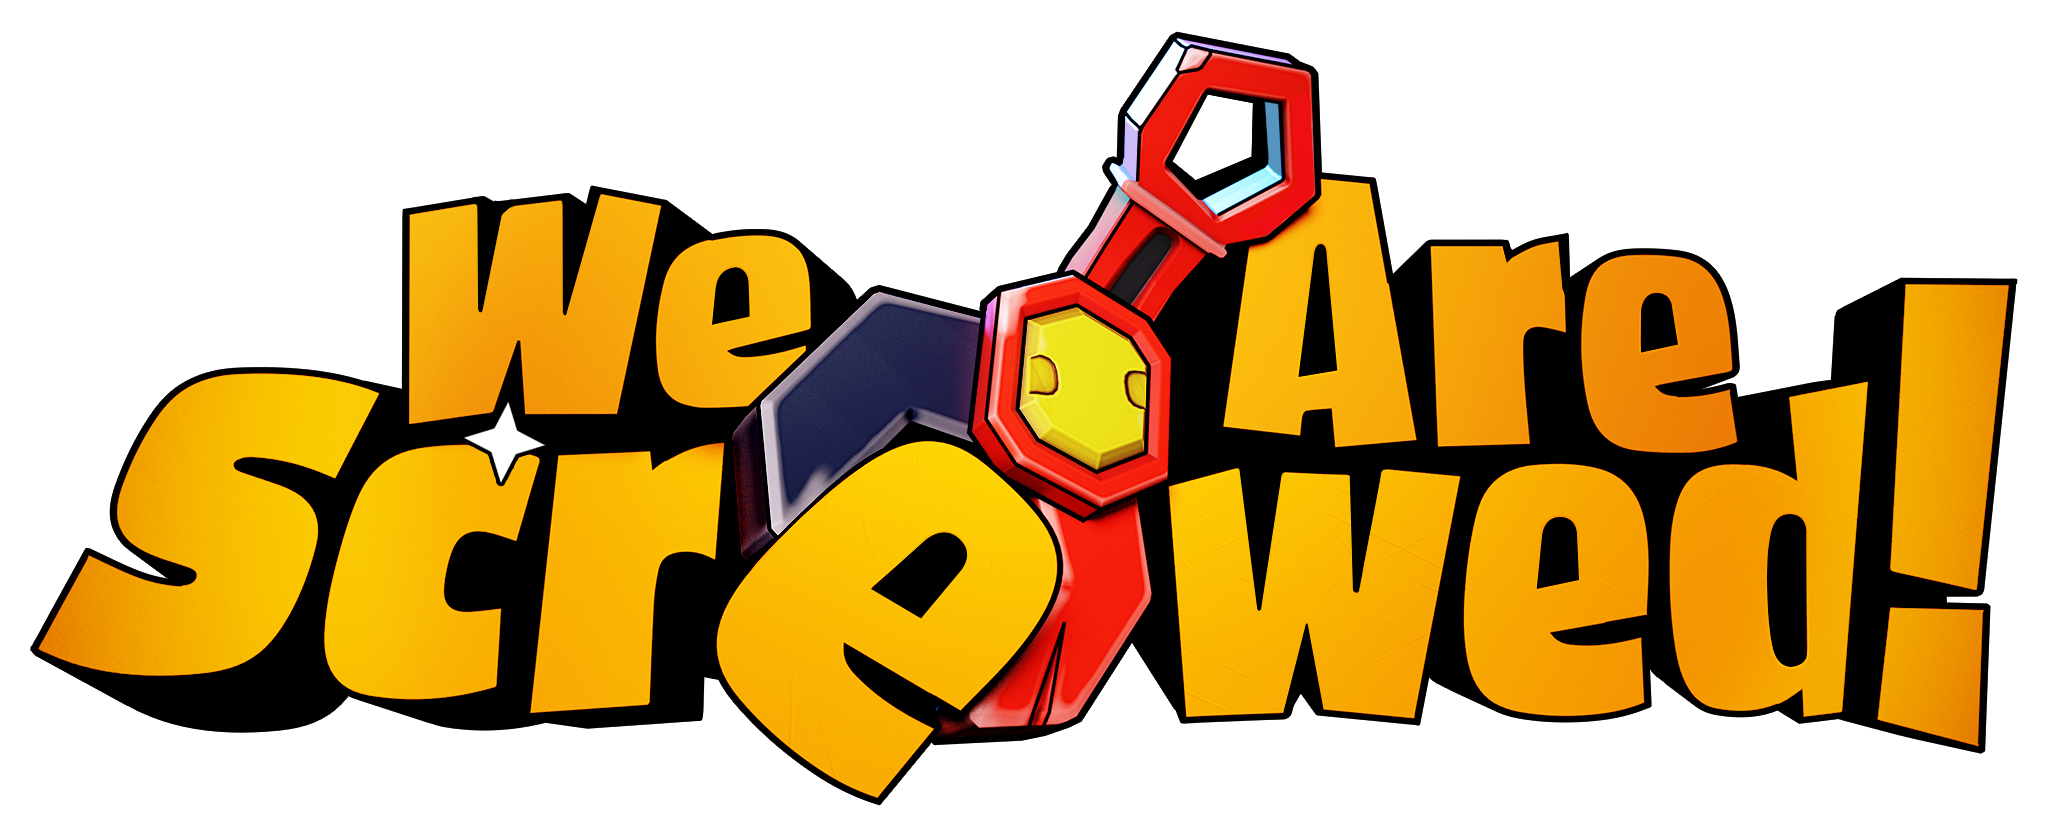 We are Screwed logo